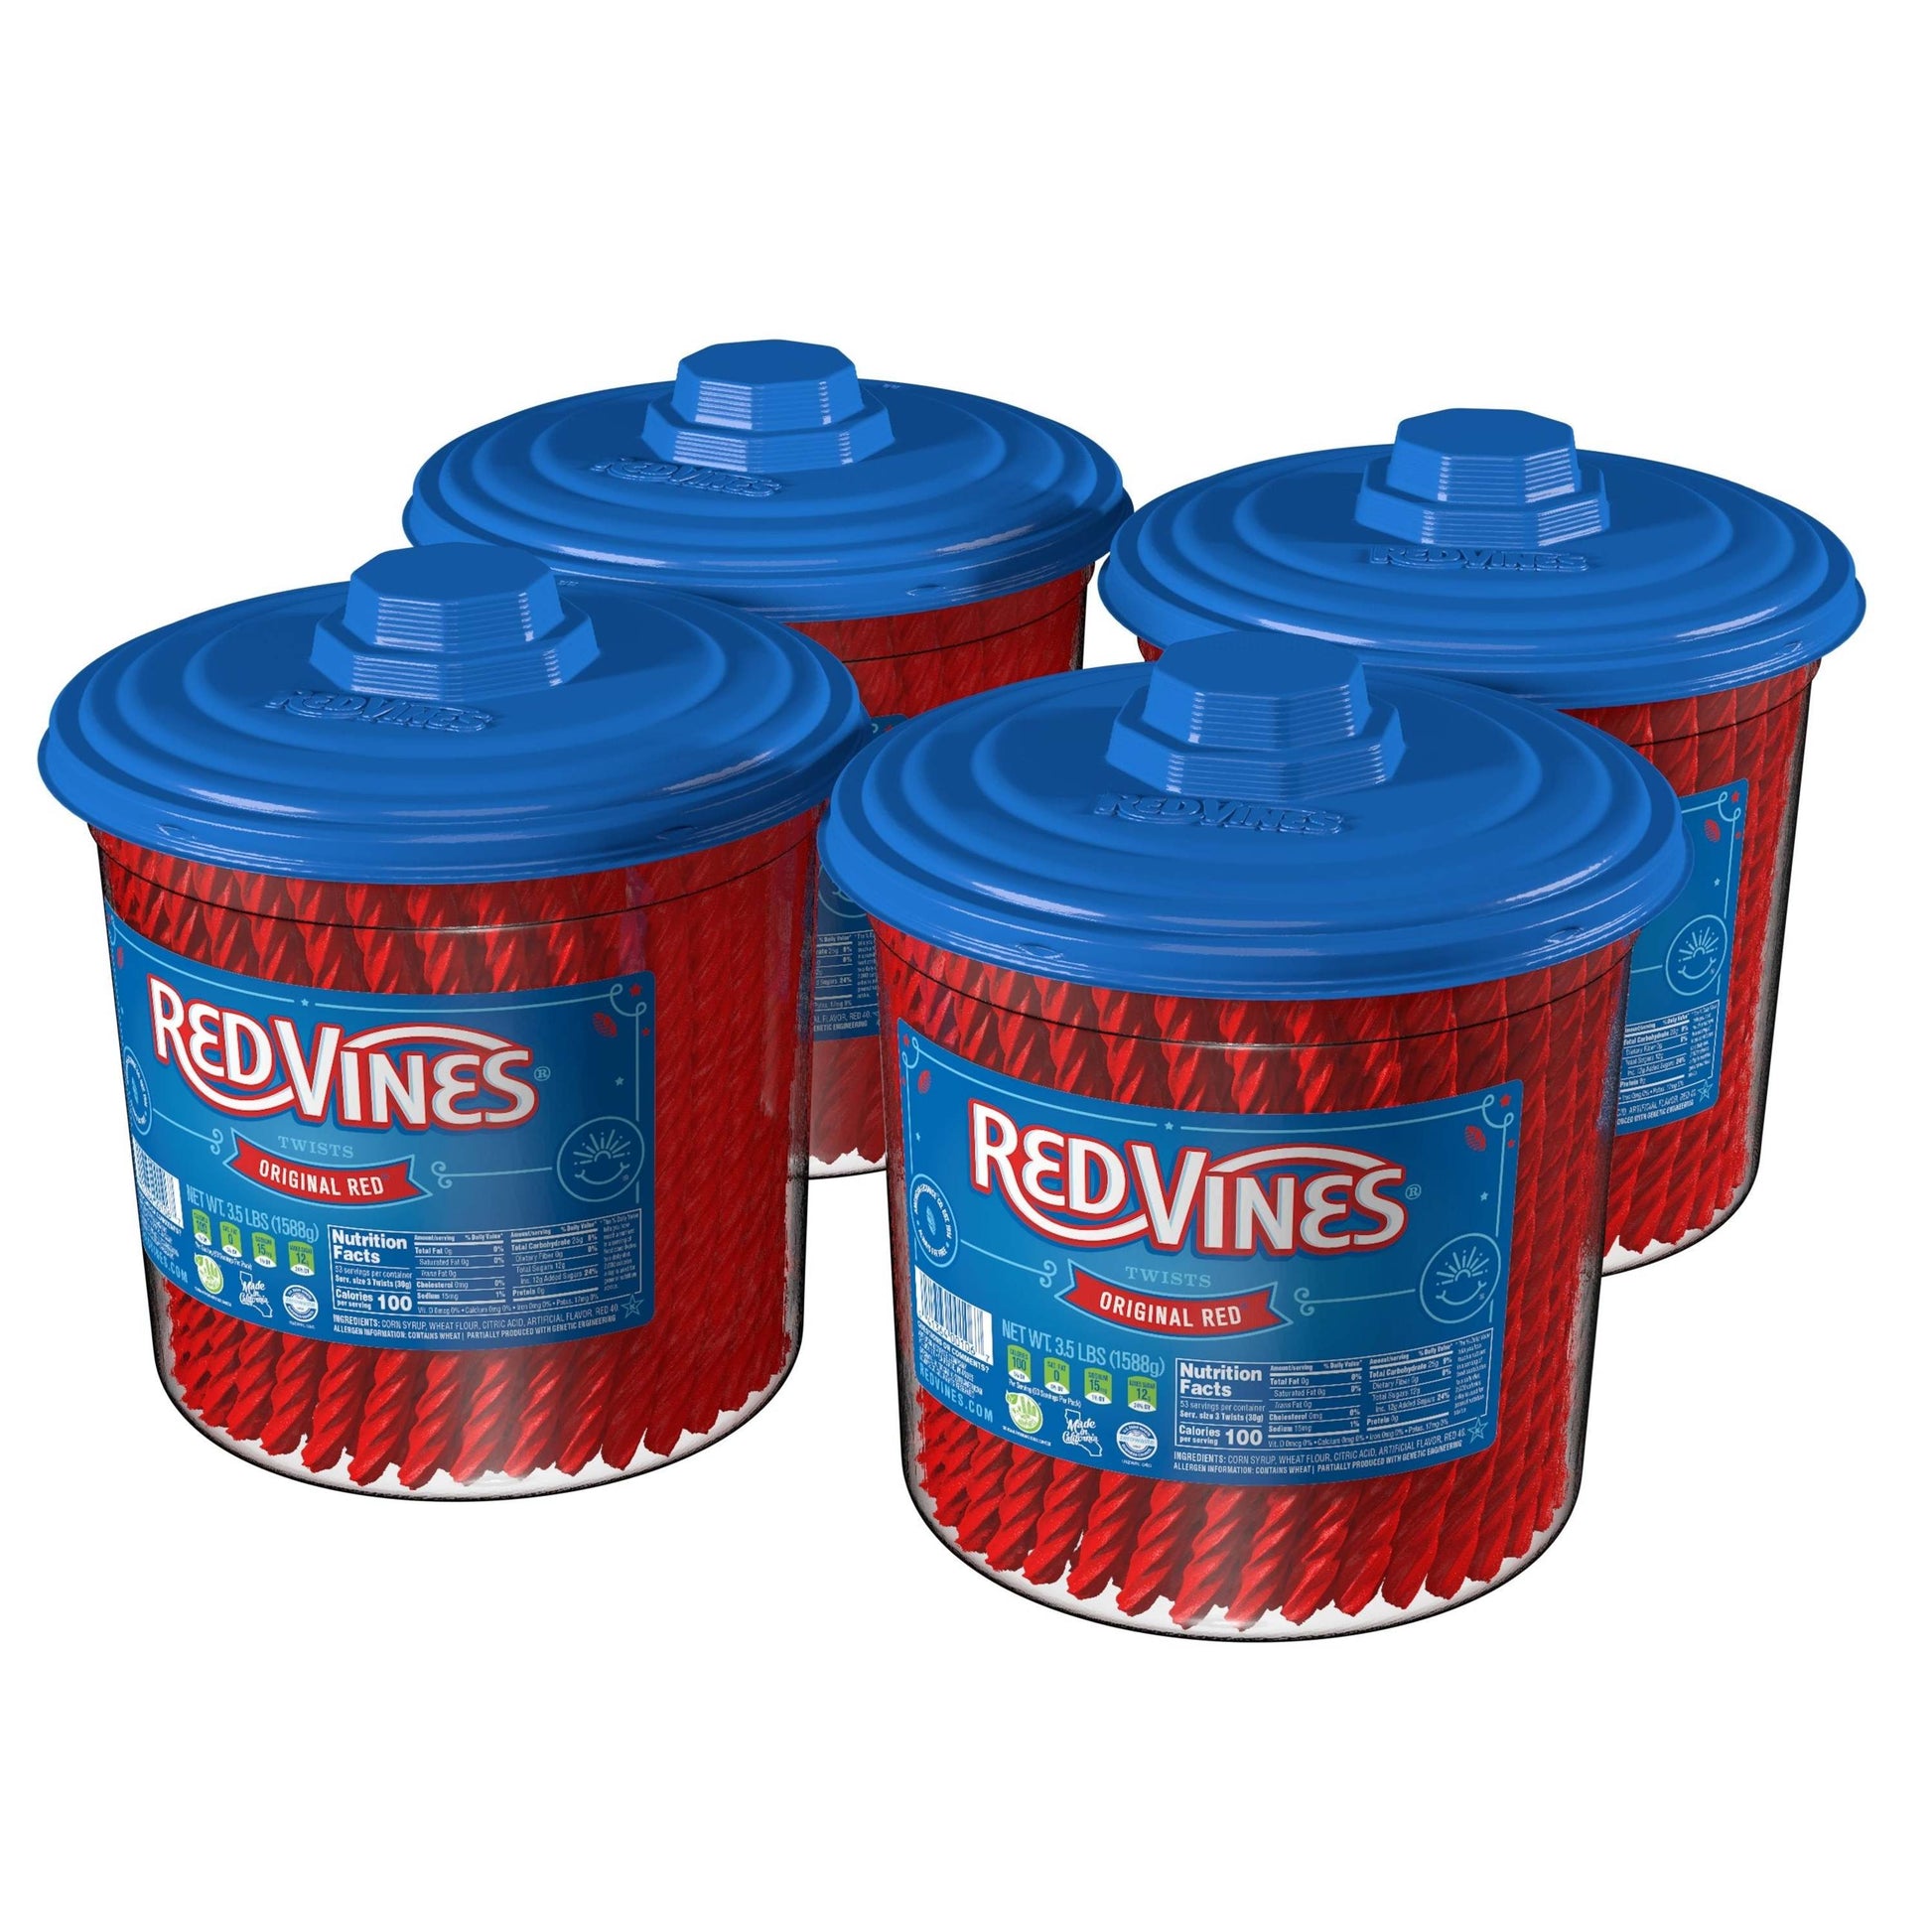 Four 3.5lb RED VINES Original Red Licorice Candy Jars